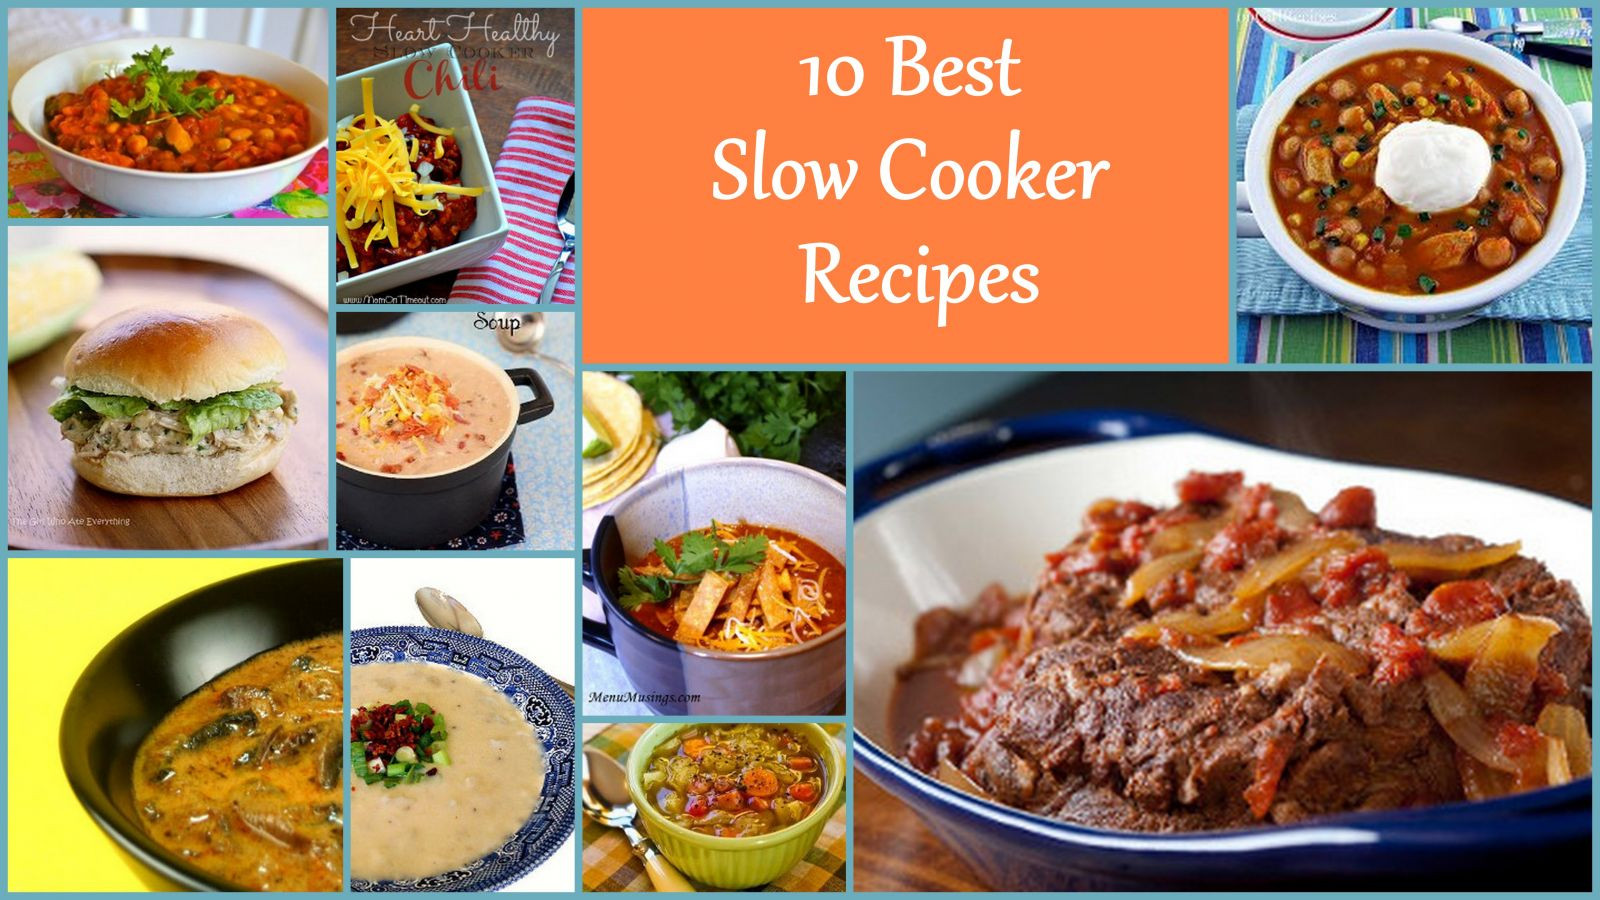 Best Healthy Slow Cooker Recipes
 10 Best Slow Cooker Recipes